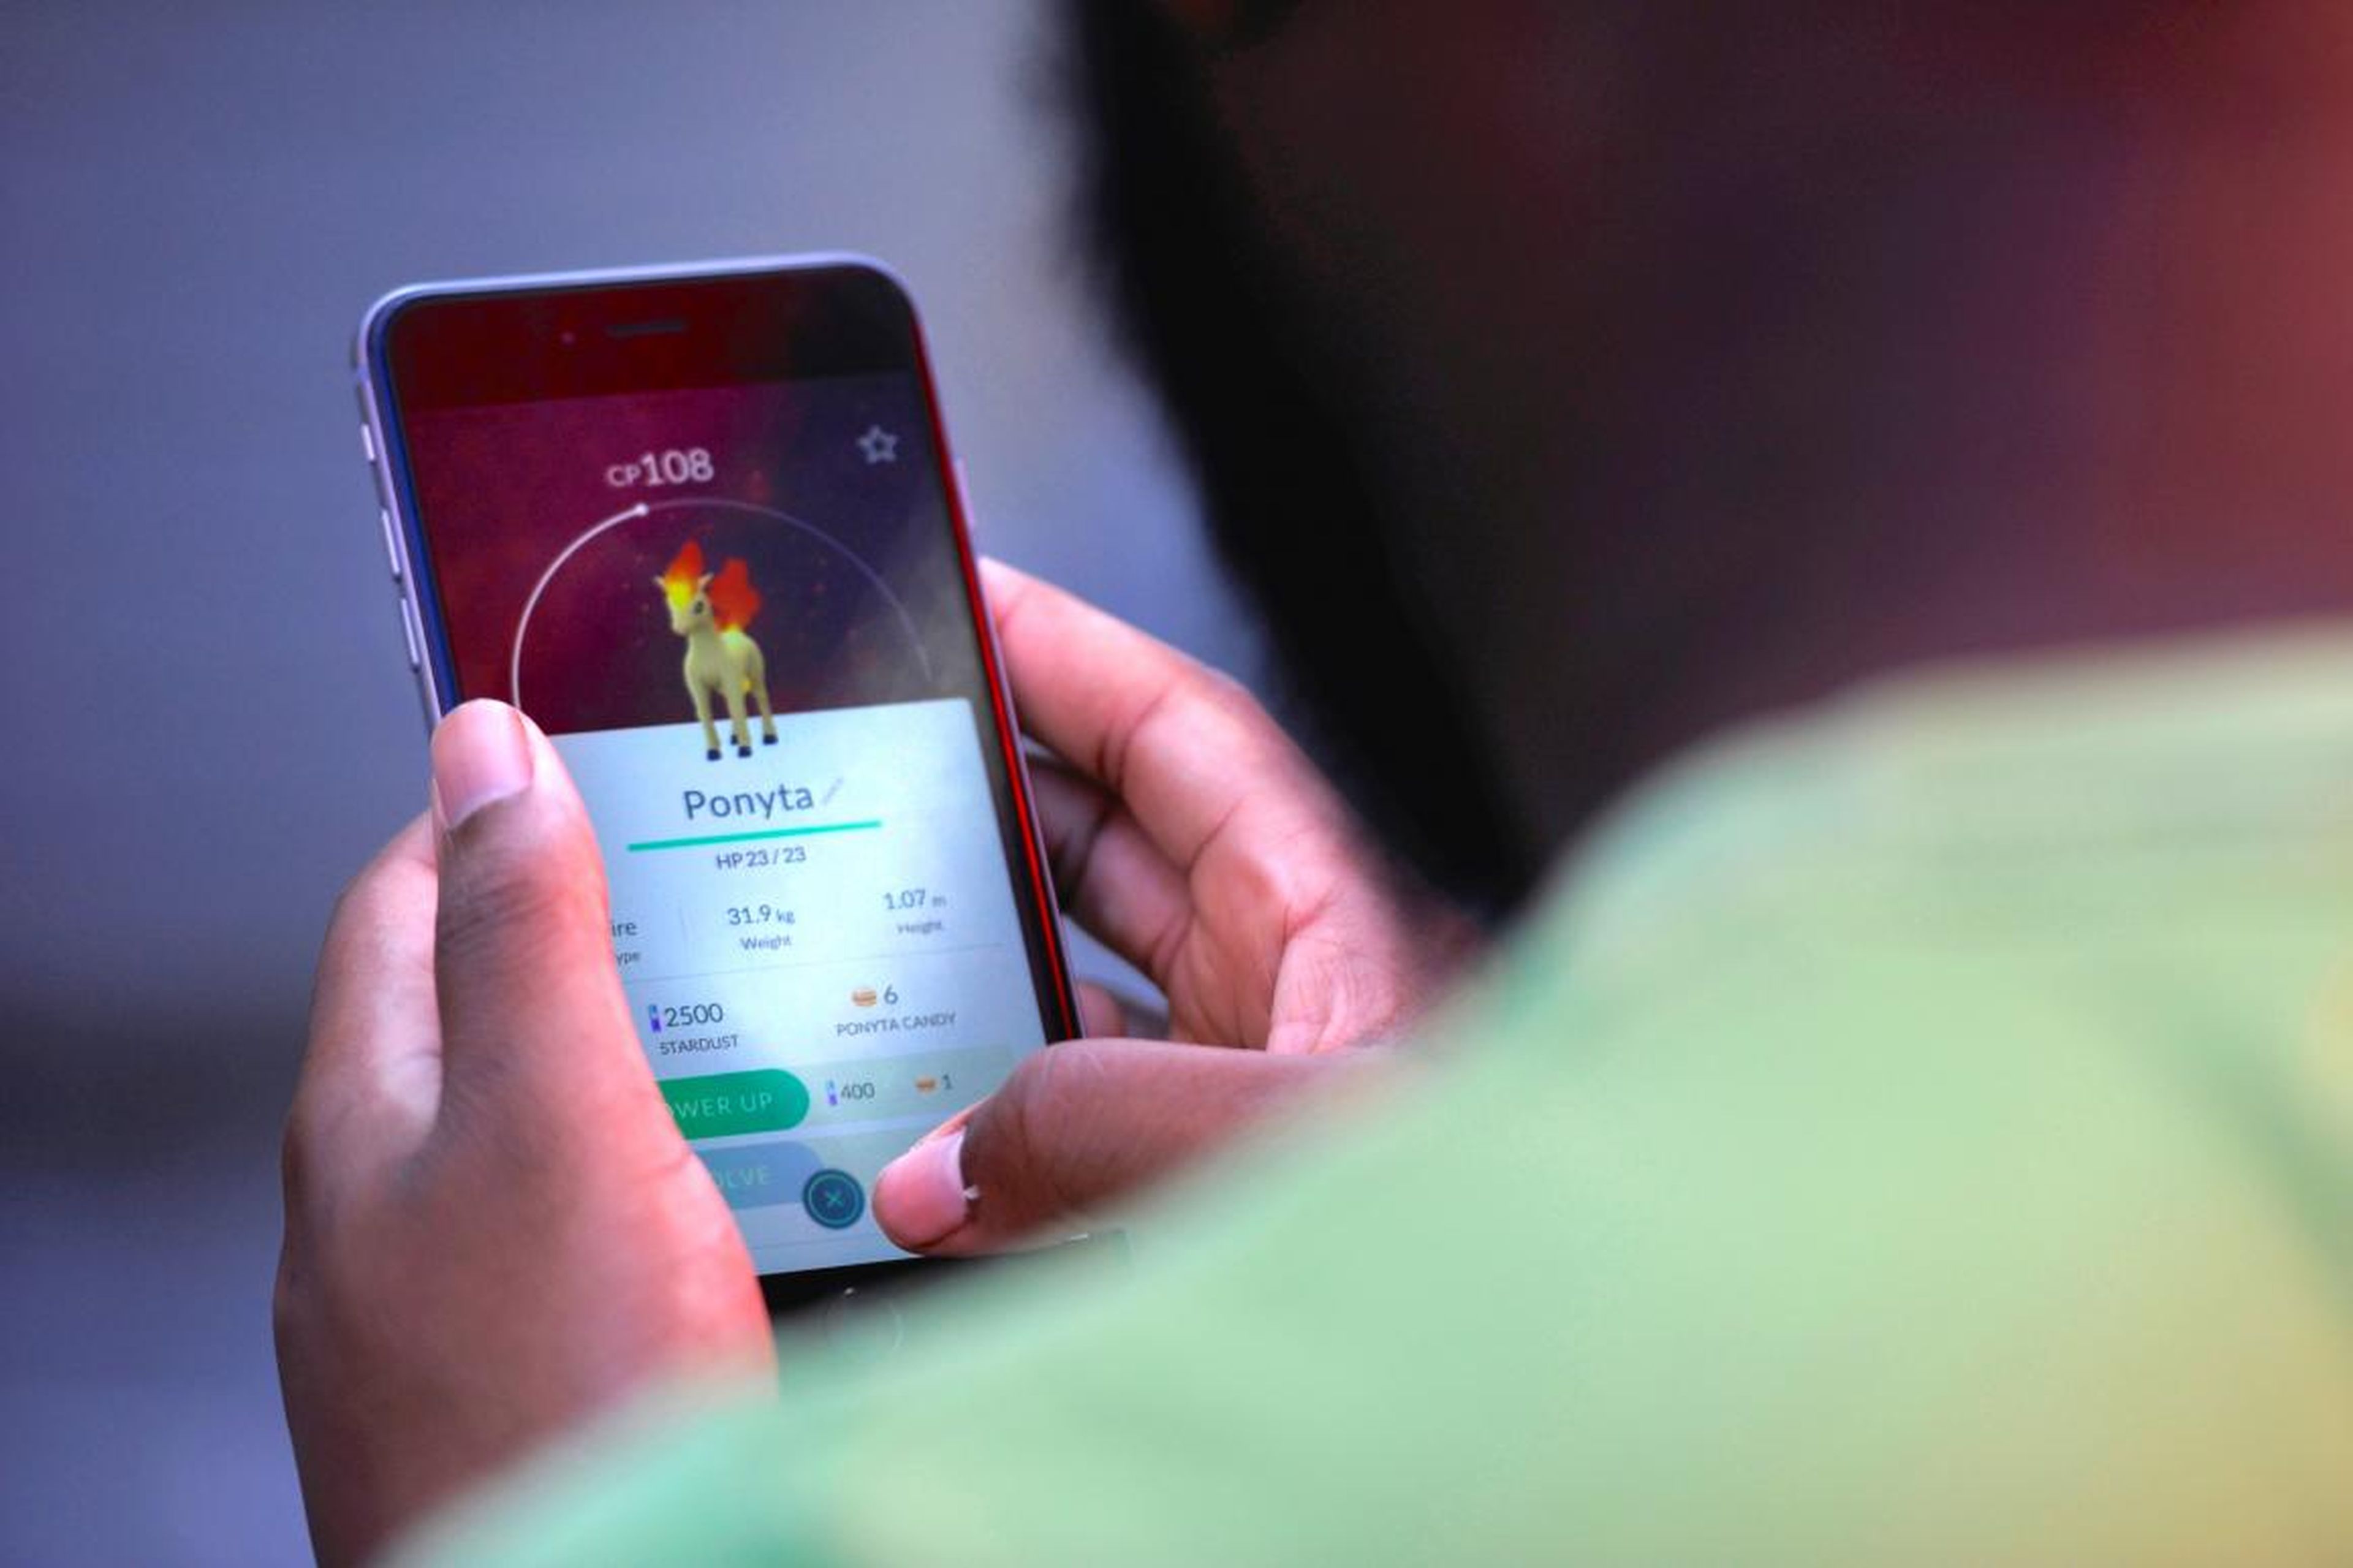 The next great mental health app will look like Pokemon Go, according to a Silicon Valley psychologist